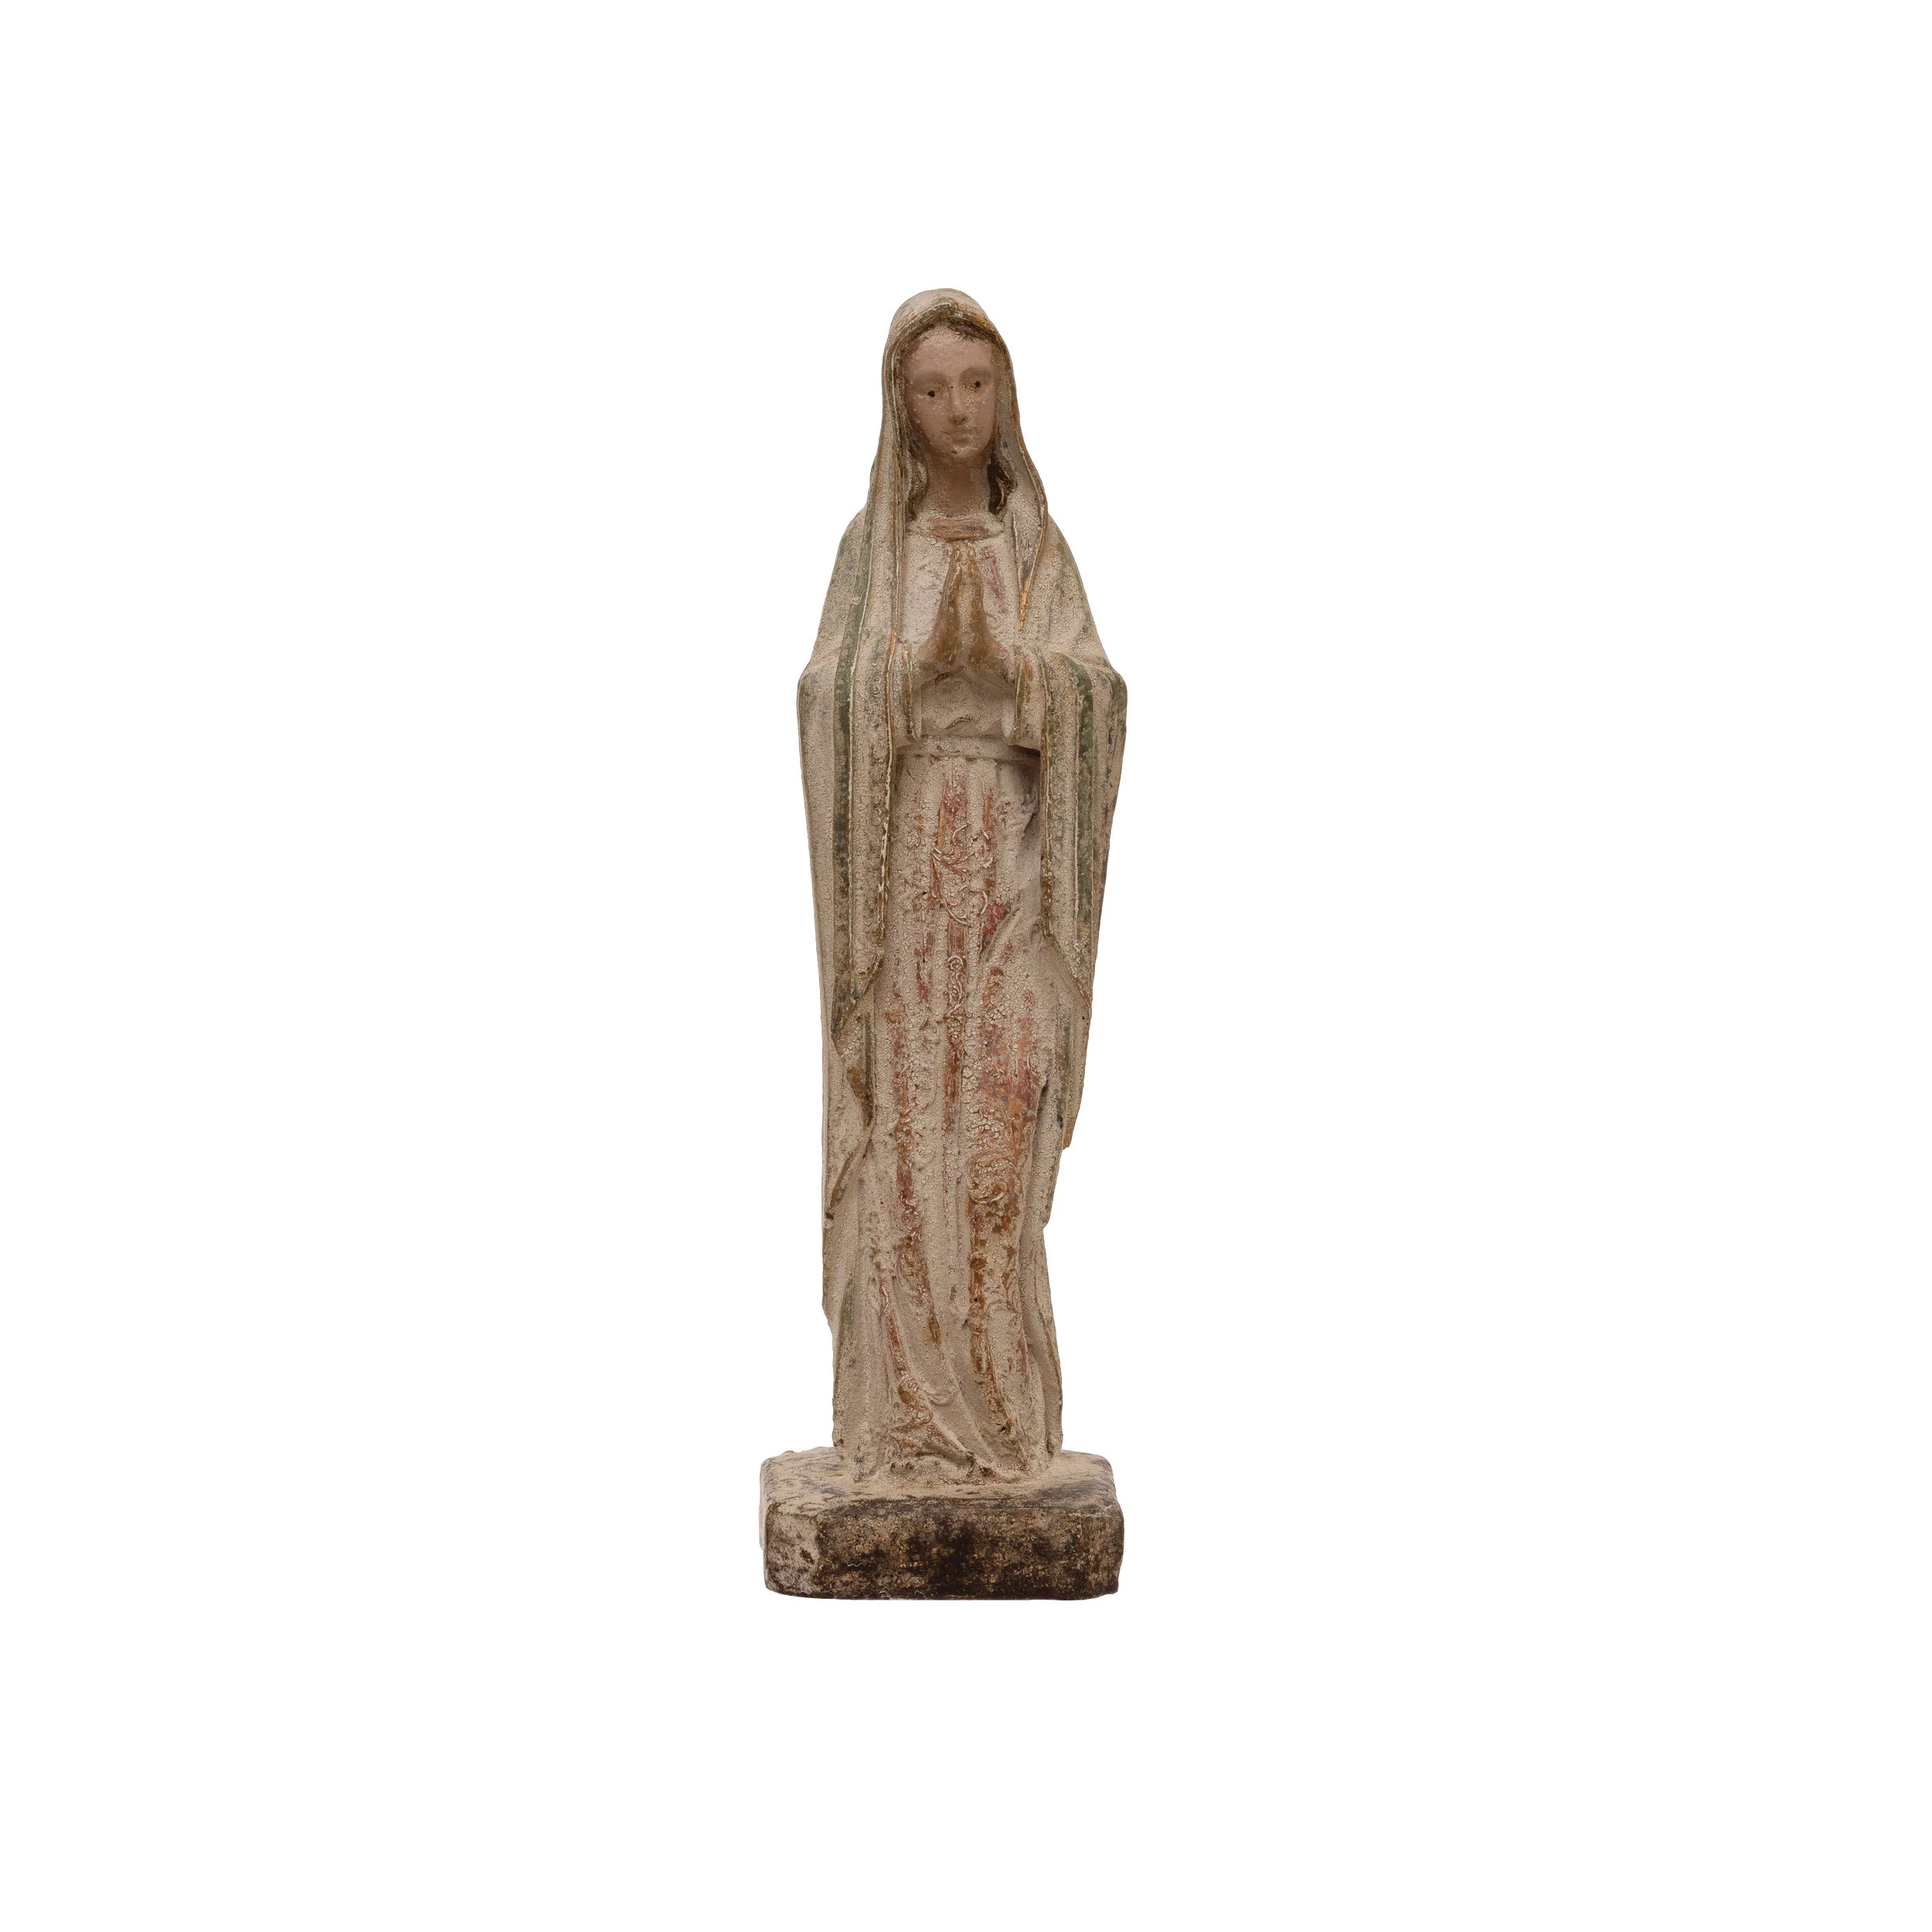 Magnesia Vintage Reproduction Virgin Mary Statue